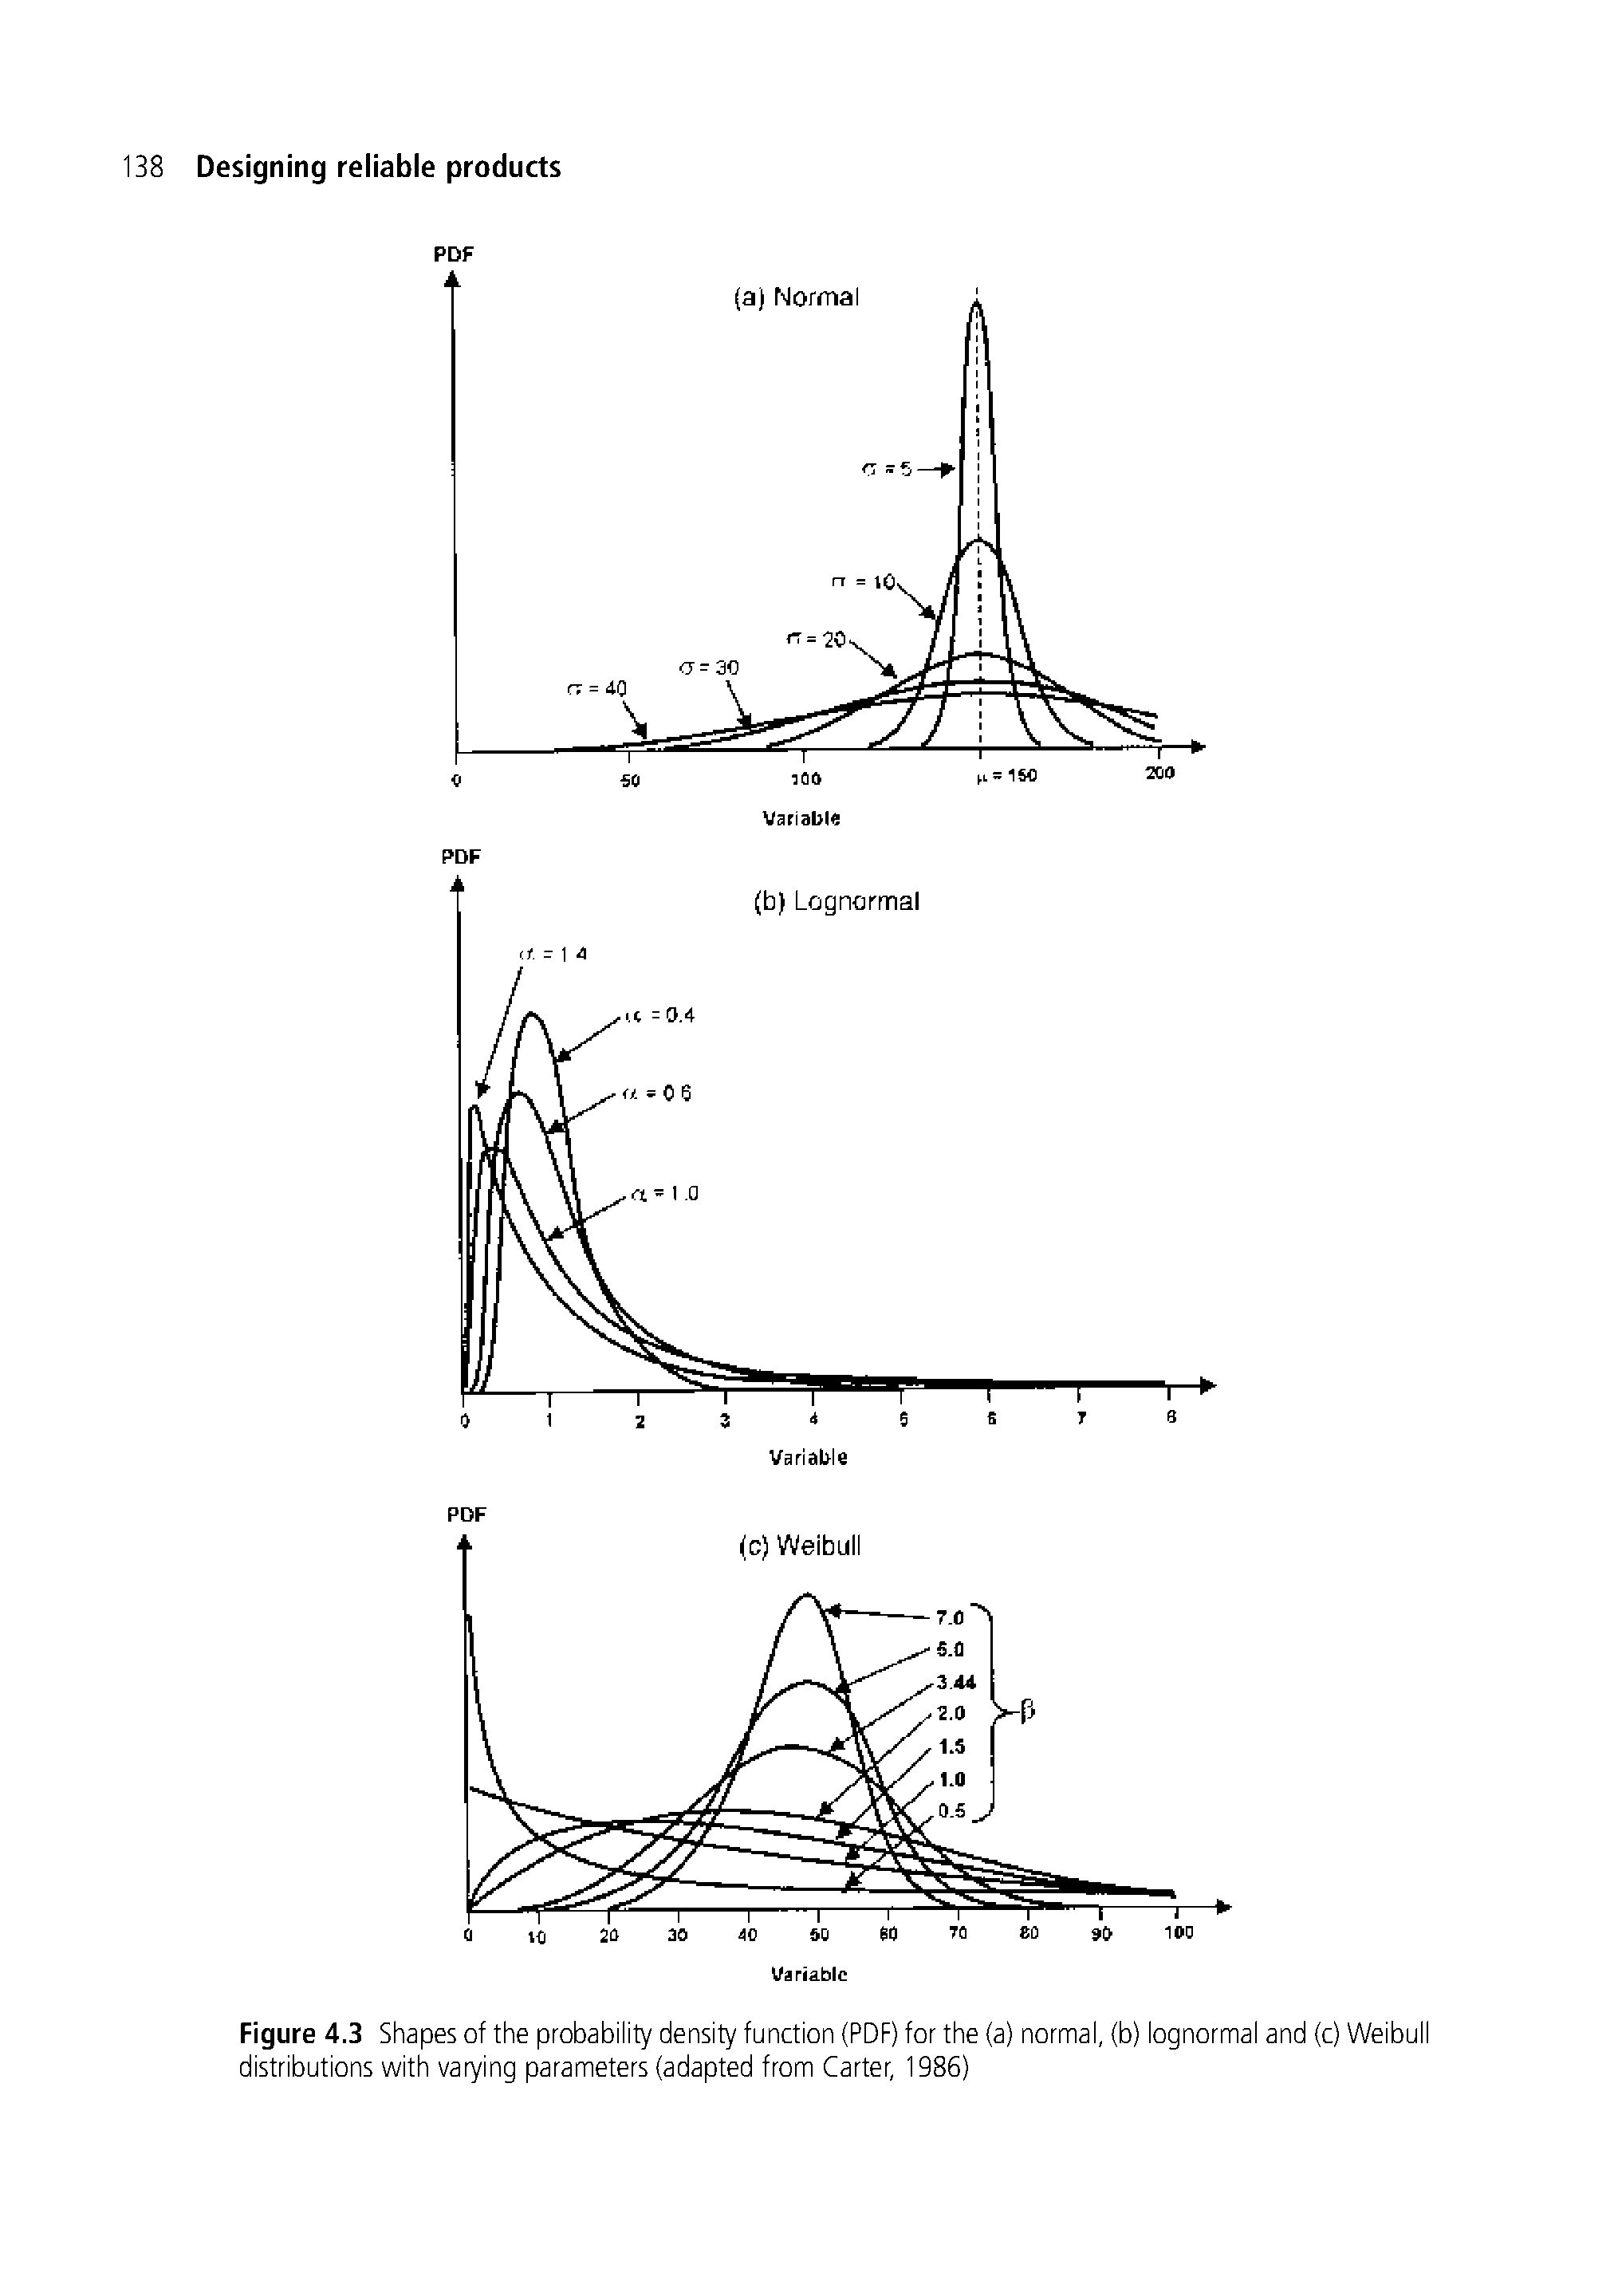 Figure 4.3 Shapes of the probability density function (PDF) for the (a) normal, (b) lognormal and (c) Weibull distributions with varying parameters (adapted from Carter, 1986)...